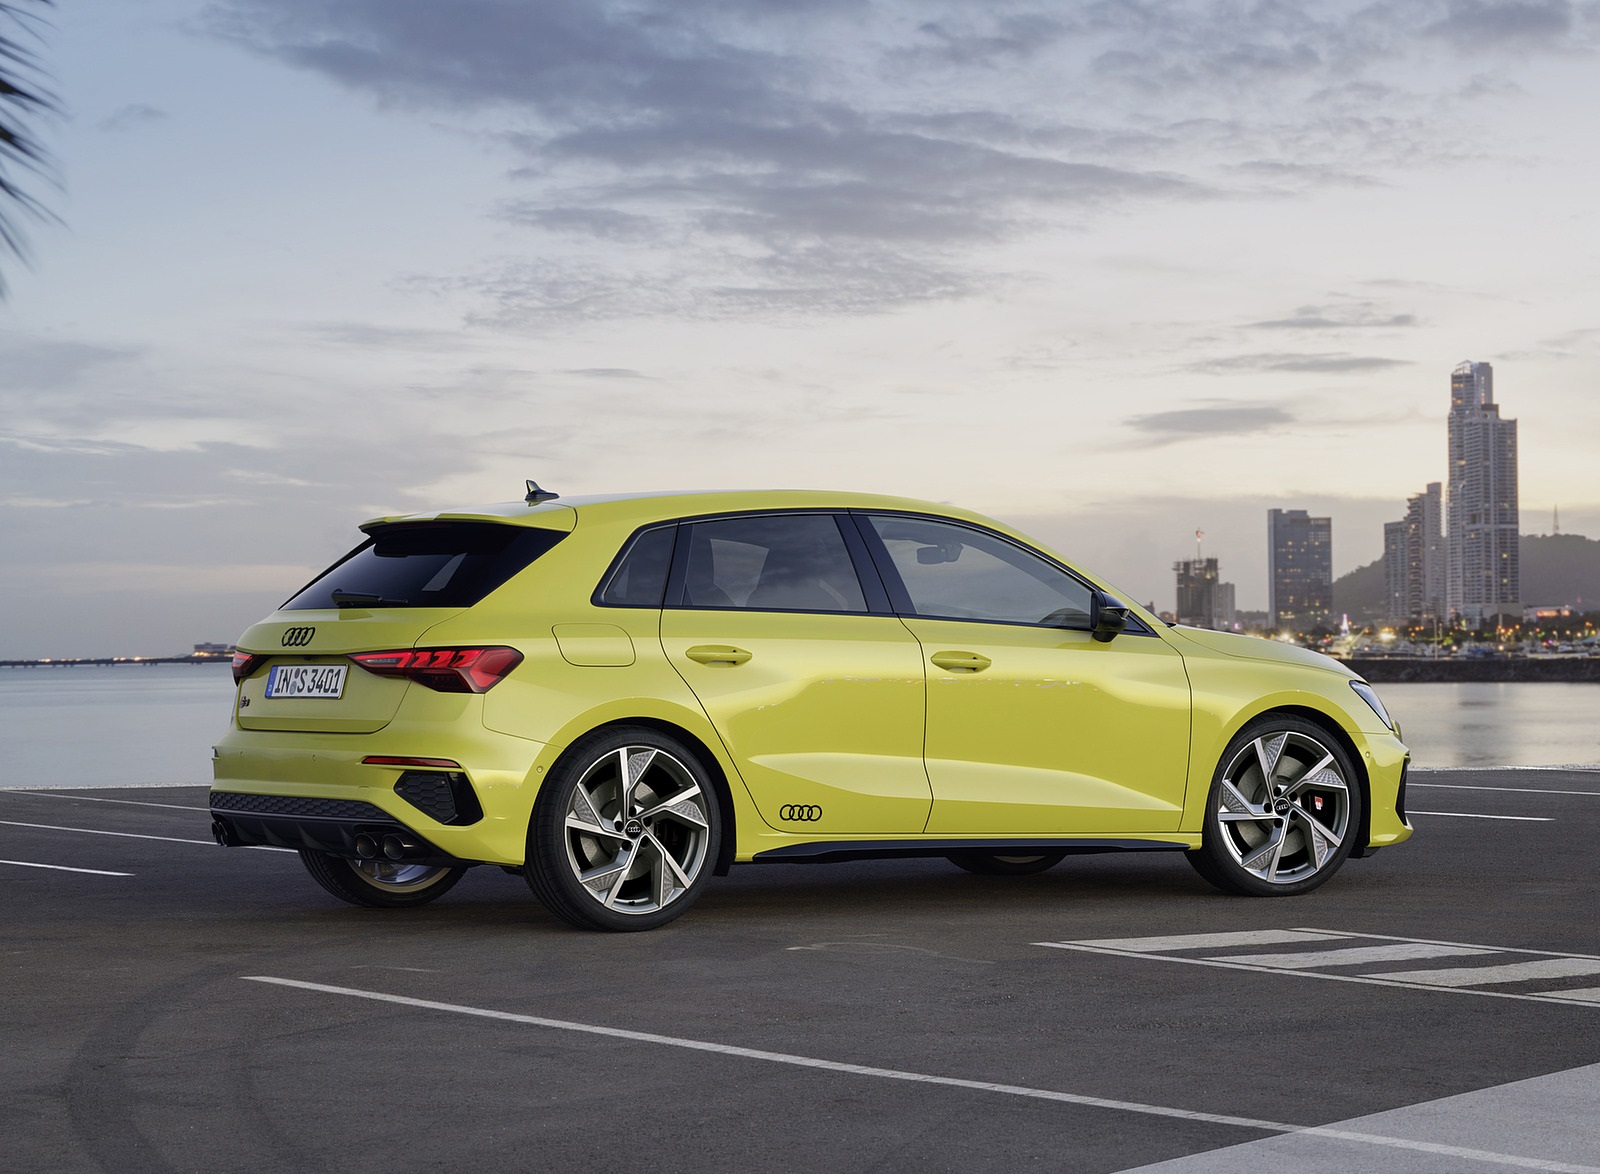 2021 Audi S3 Sportback (Color: Python Yellow) Rear Three-Quarter Wallpapers #14 of 37